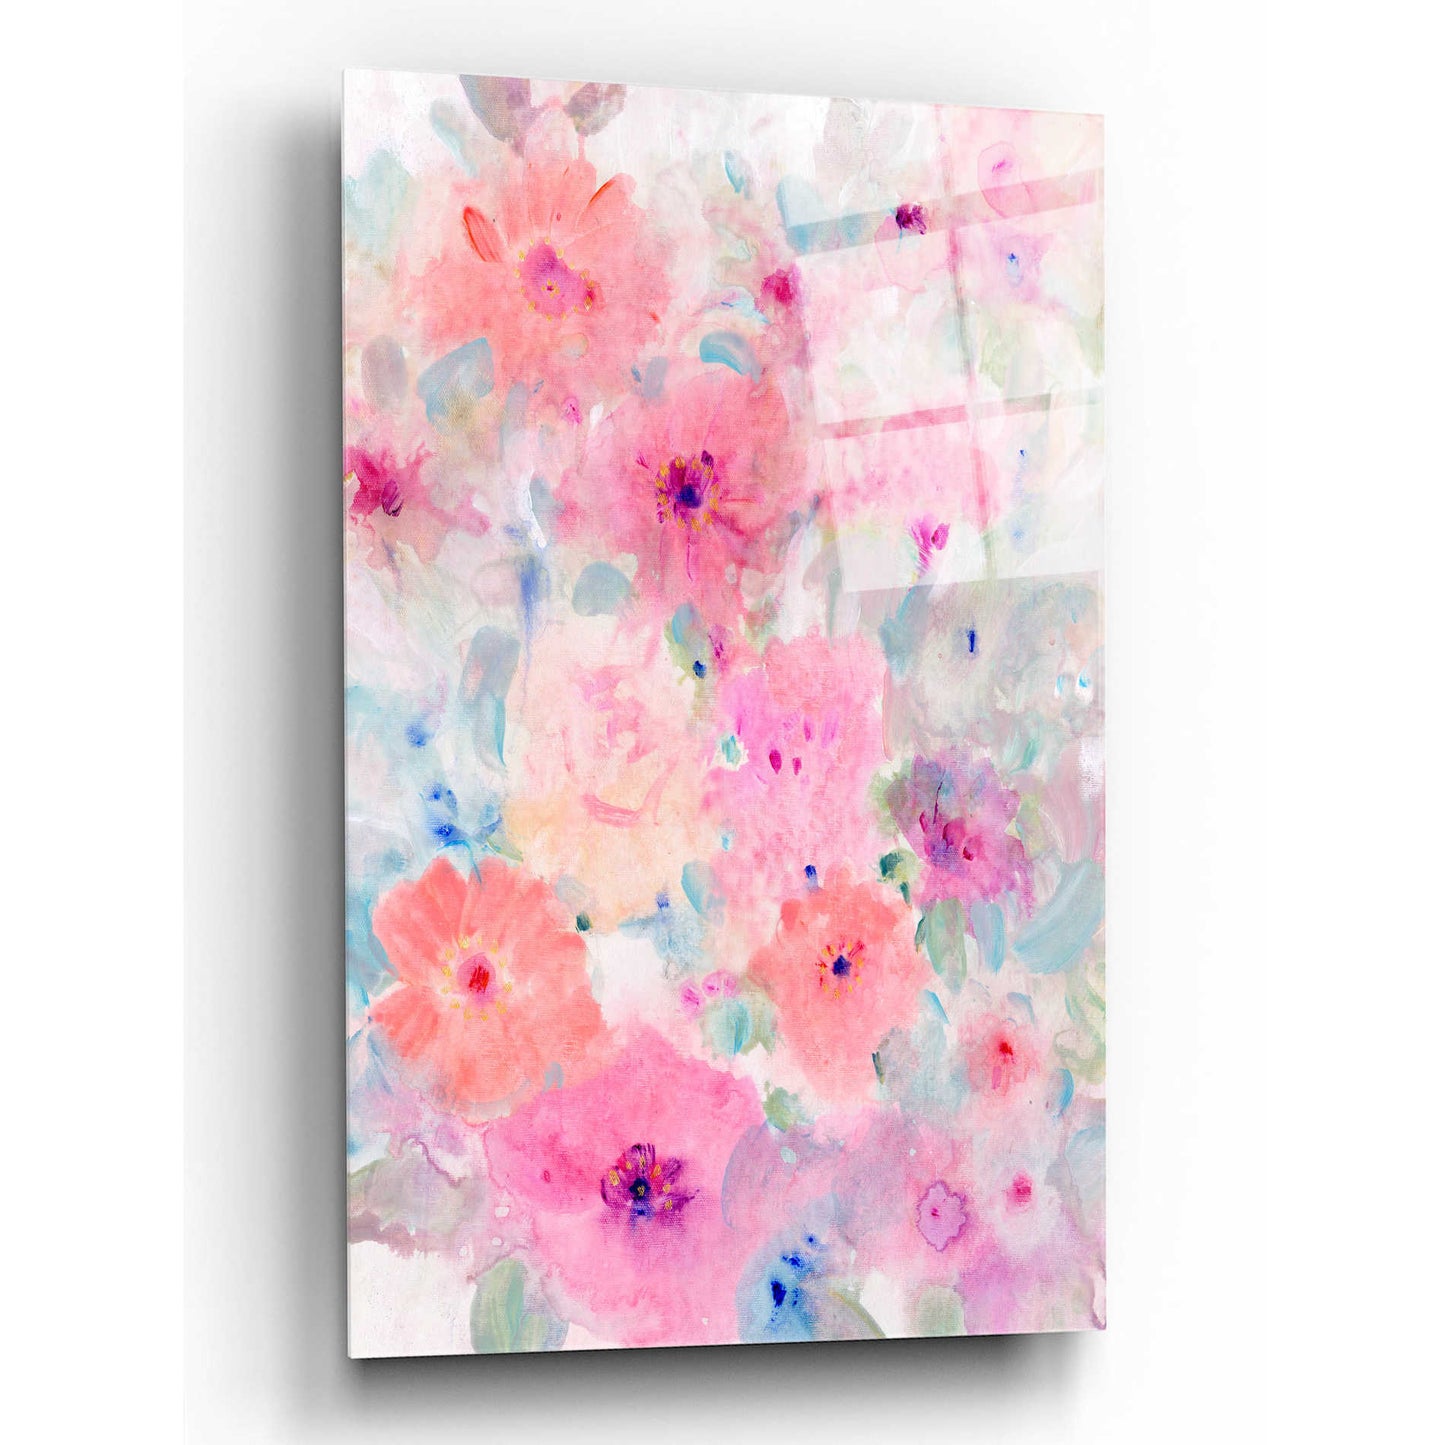 Epic Art 'Bright Floral Design  I' by Tim O'Toole, Acrylic Glass Wall Art,12x16